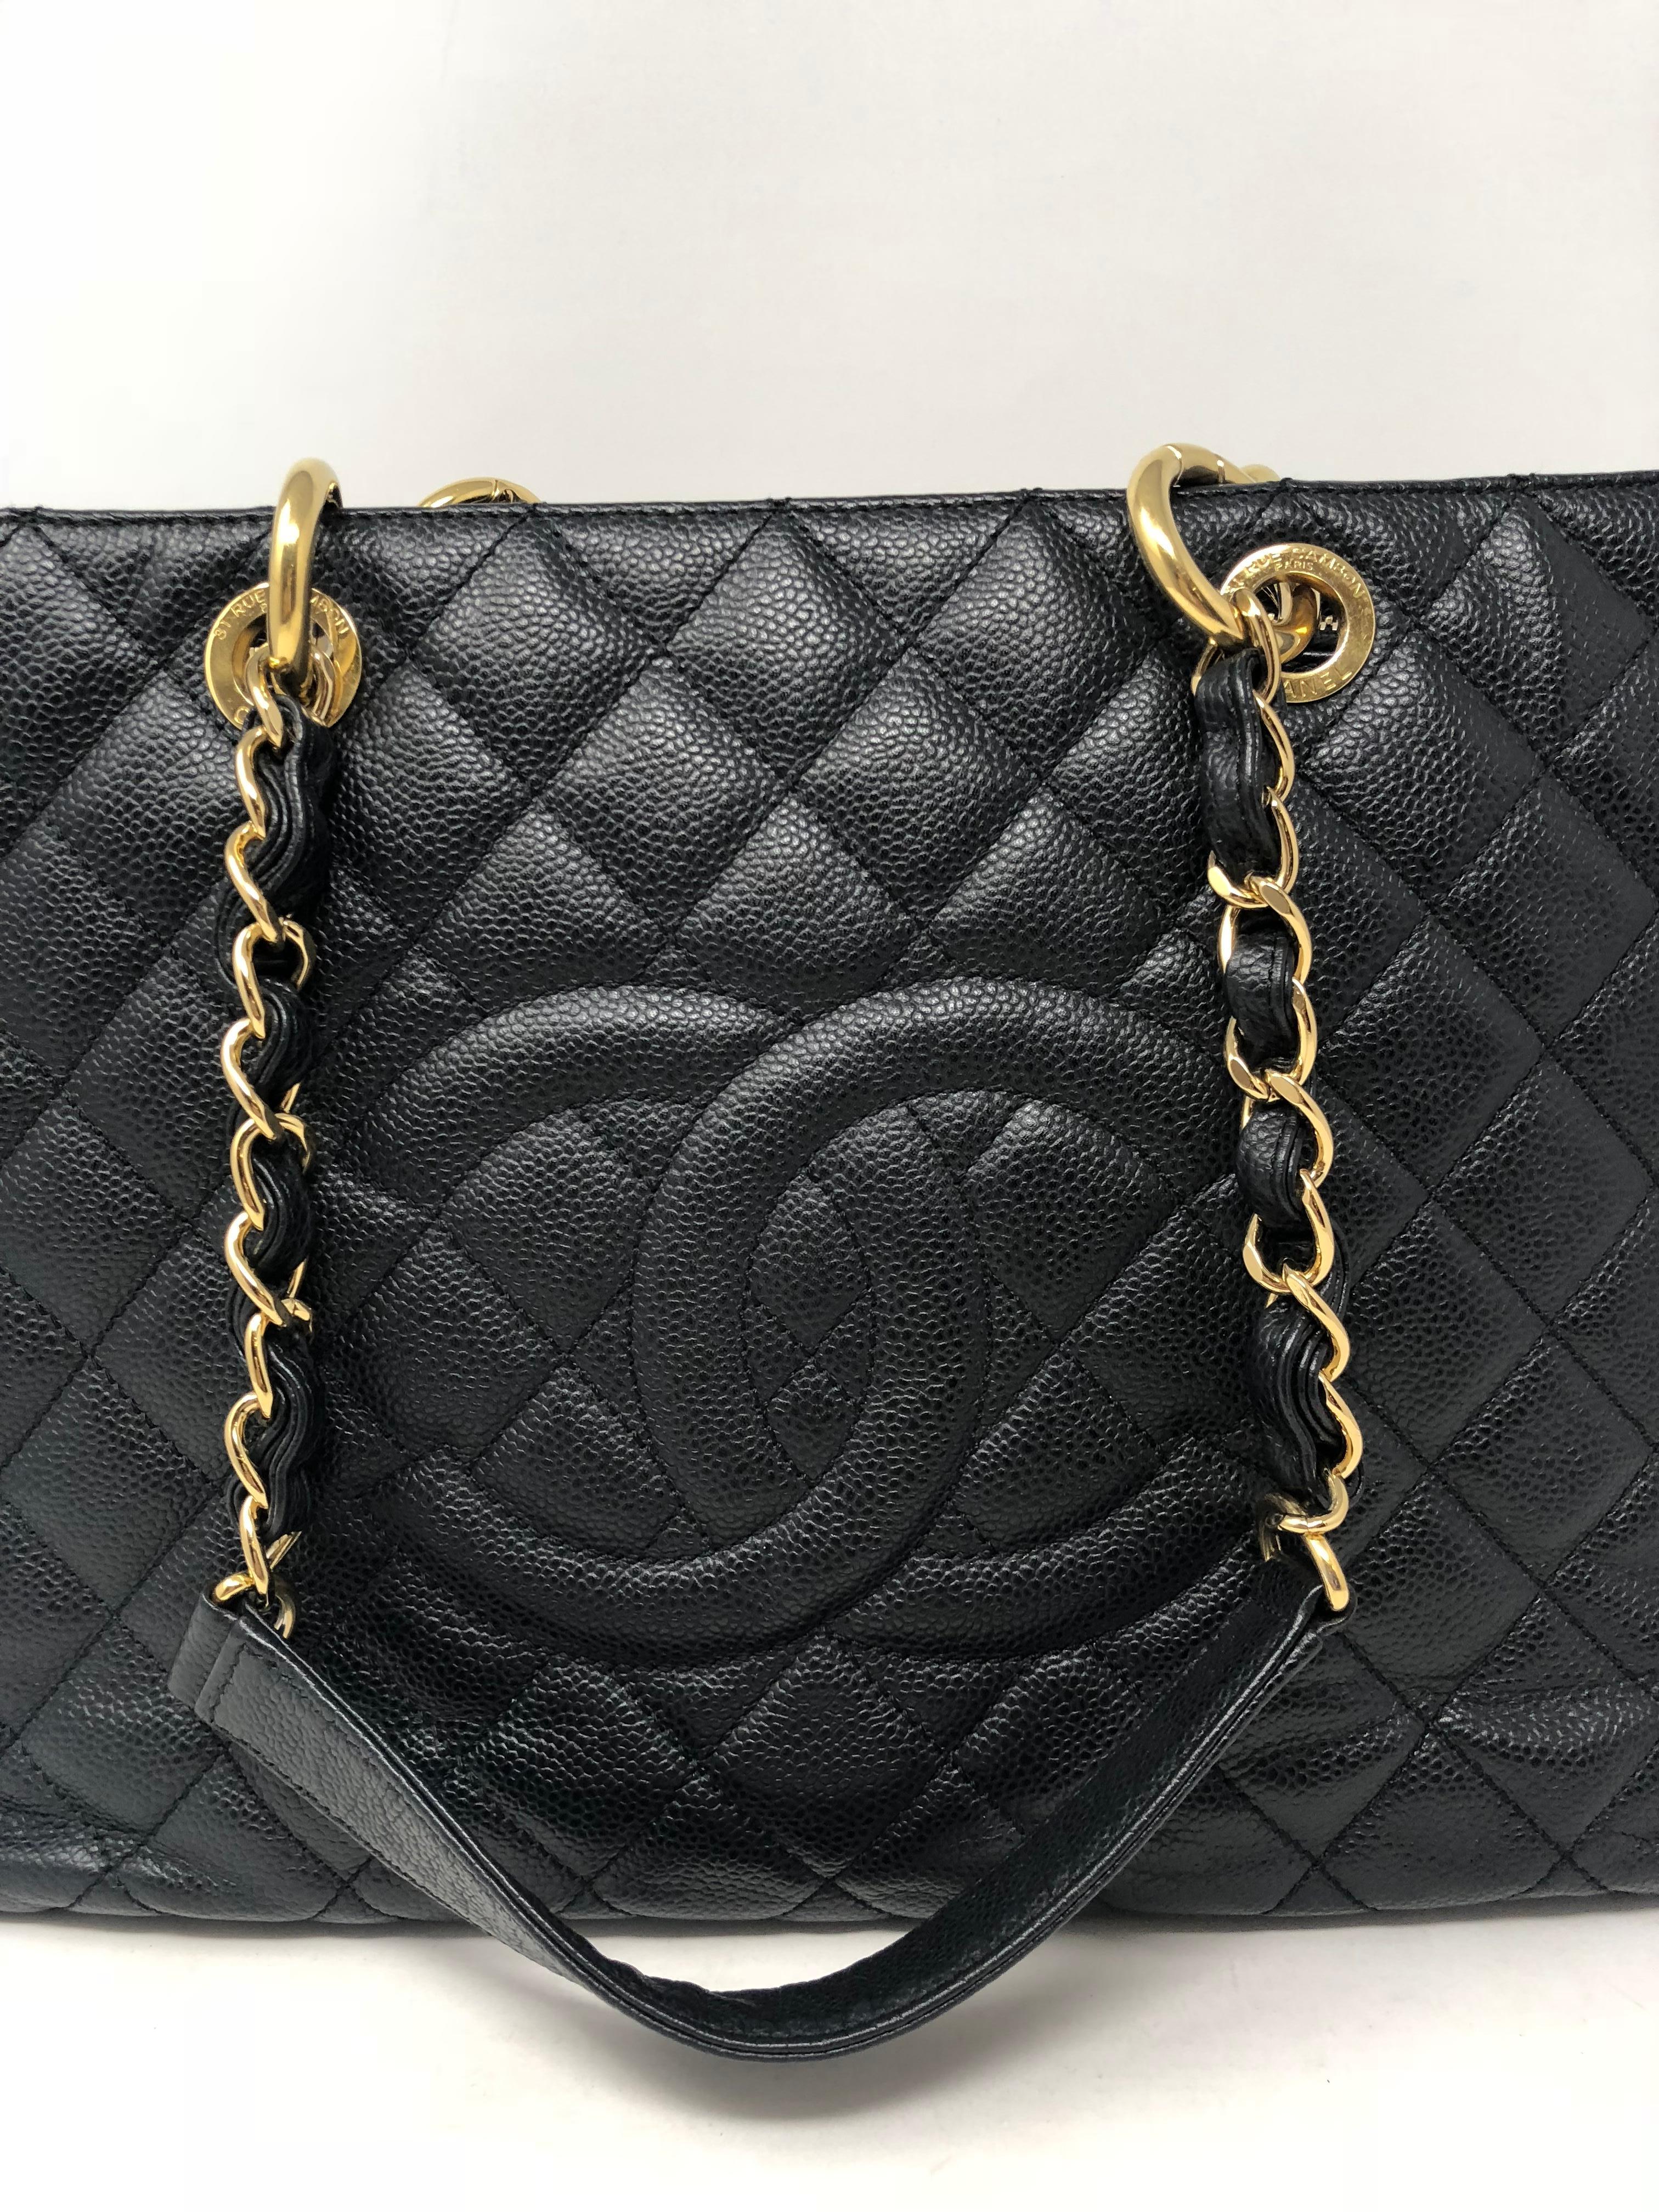 Chanel Black Grand Shopper Tote with gold hardware. Caviar leather in good condition. GST bags are discontinued at Chanel.  Guaranteed authentic. 